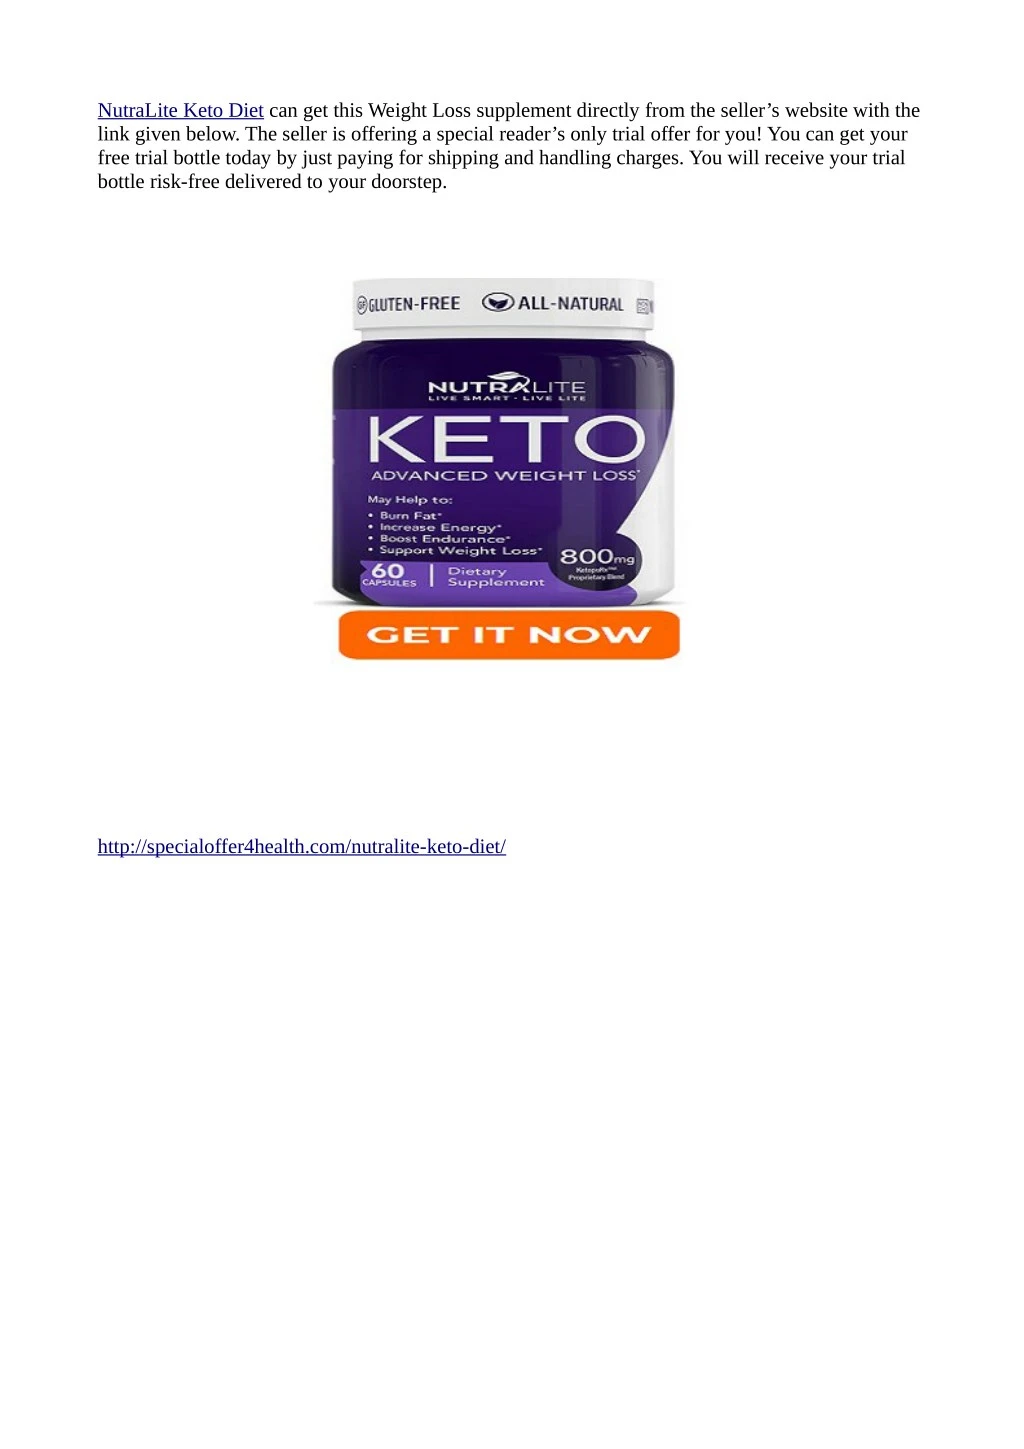 nutralite keto diet can get this weight loss